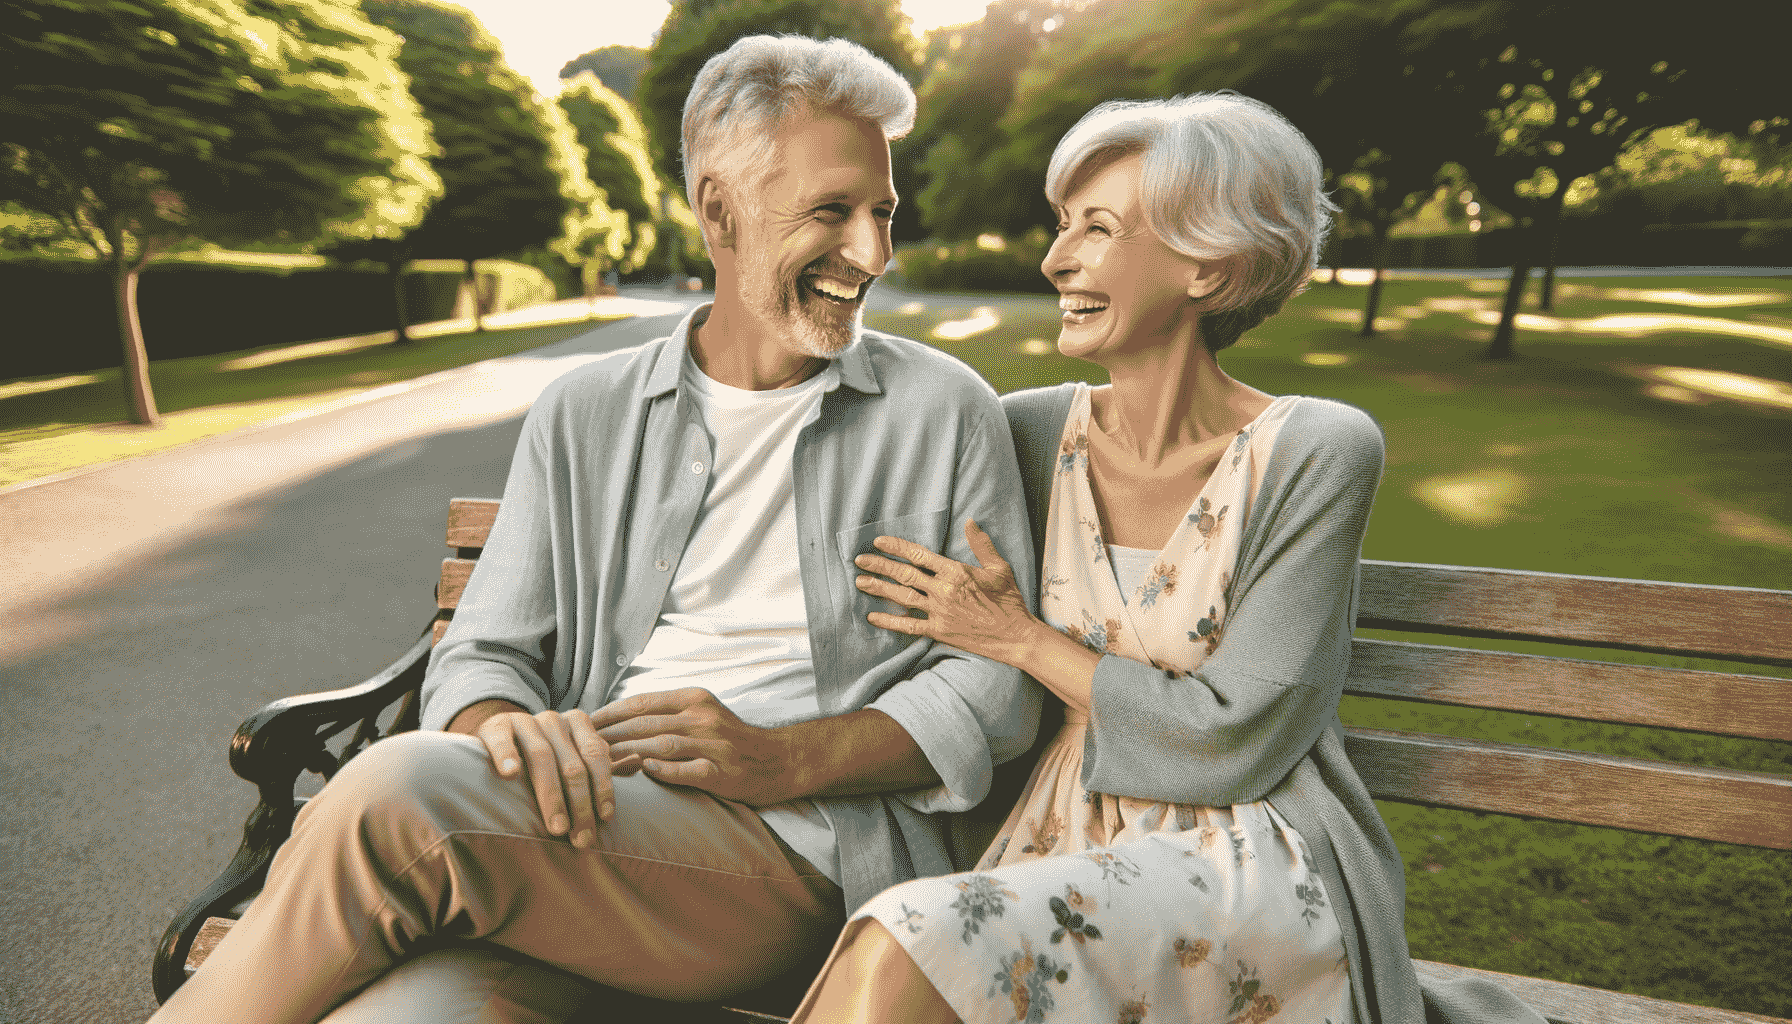 dating in your 60s red flag